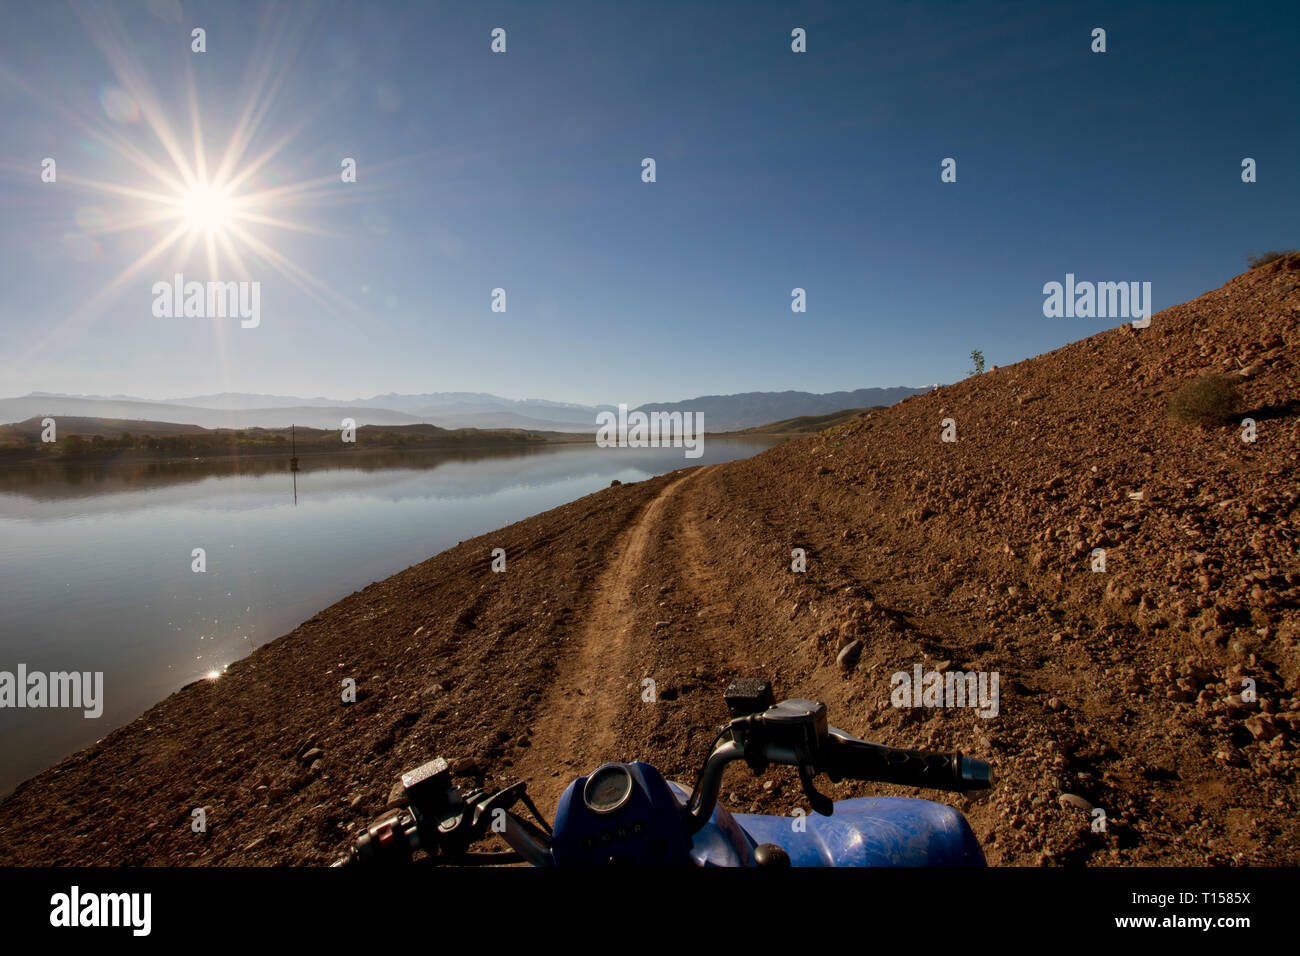 Morocco, Lalla Takerkoust, reservoir against the sun, quadbike in the foreground Stock Photo